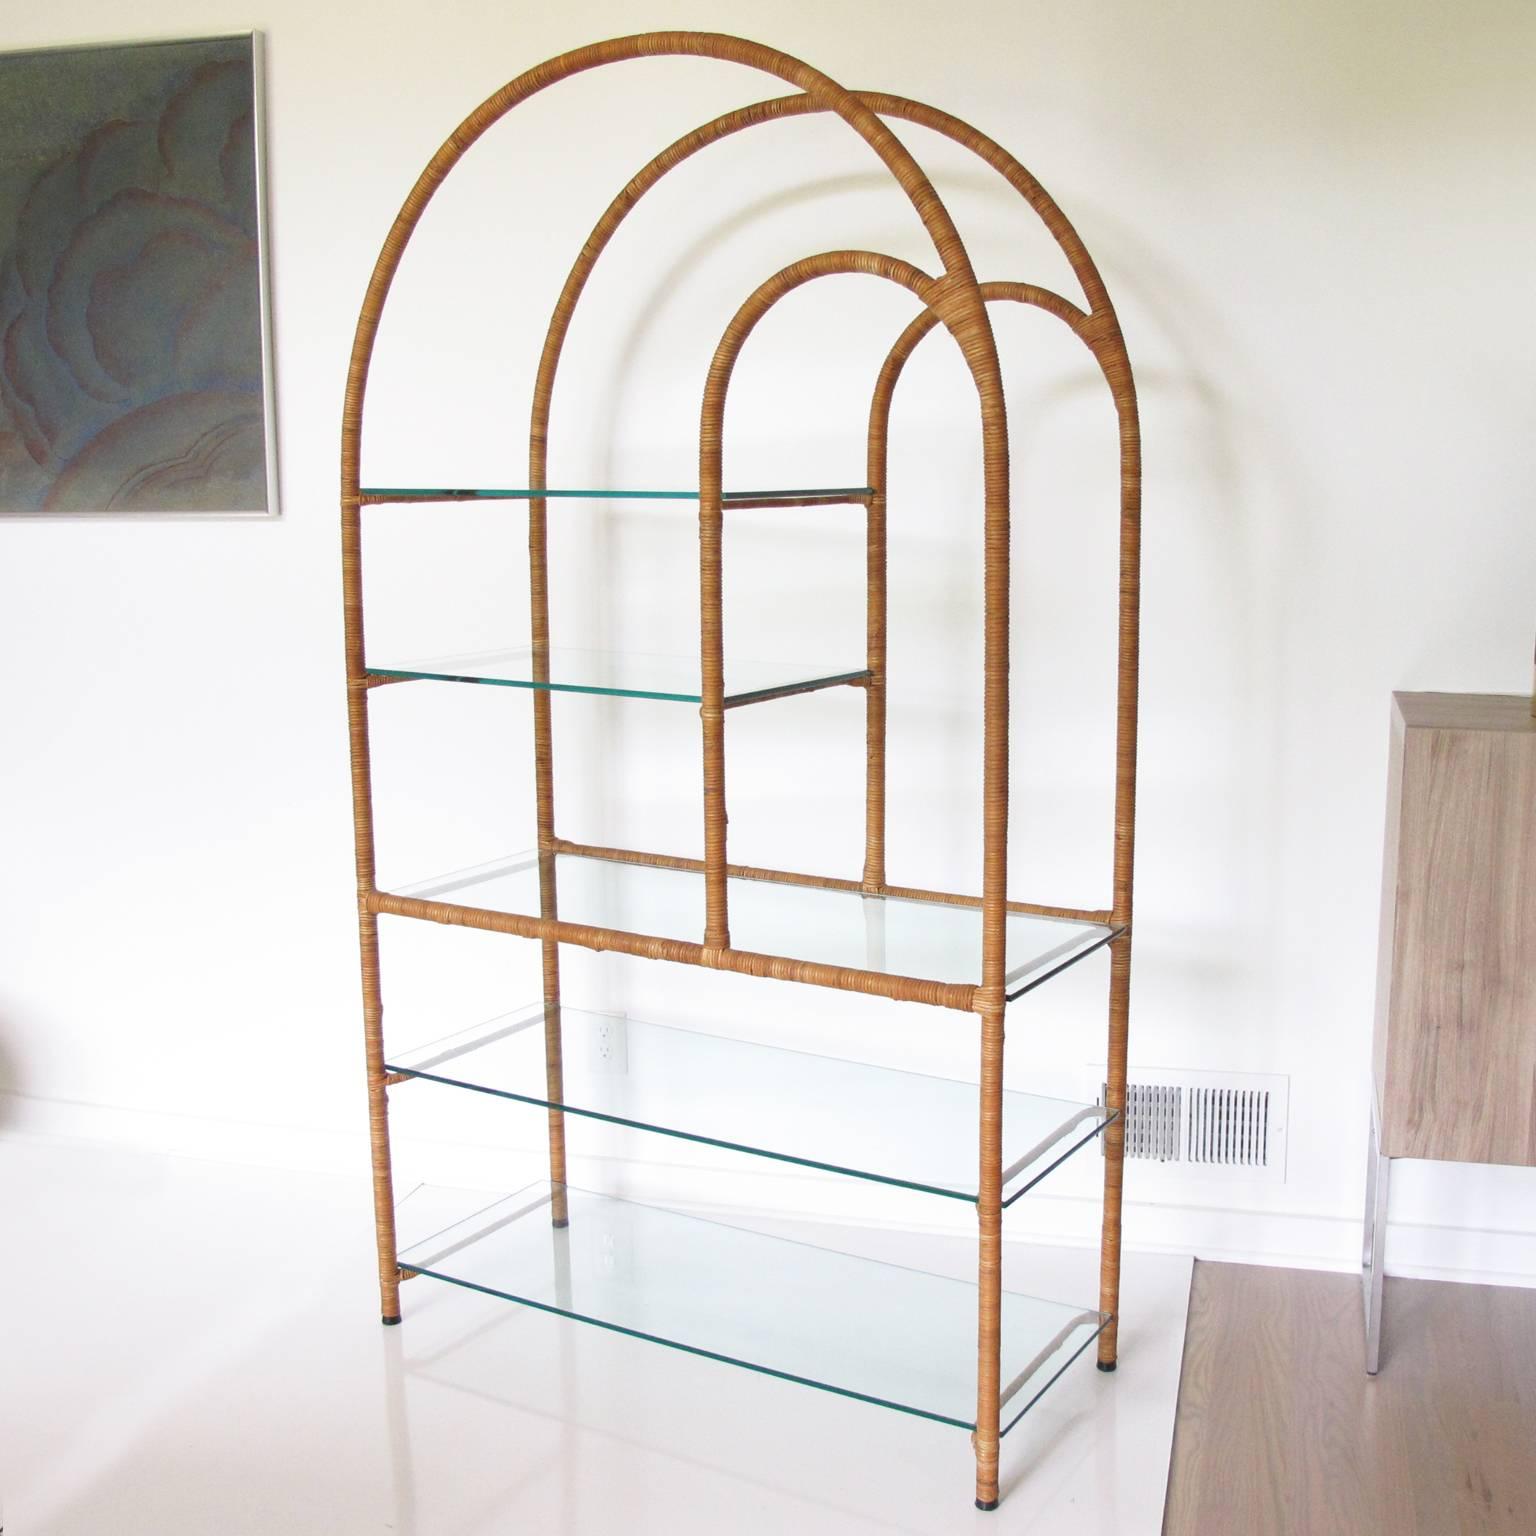 American Milo Baughman Style Mid-Century Modern Rattan and Glass Etagere Bookcase